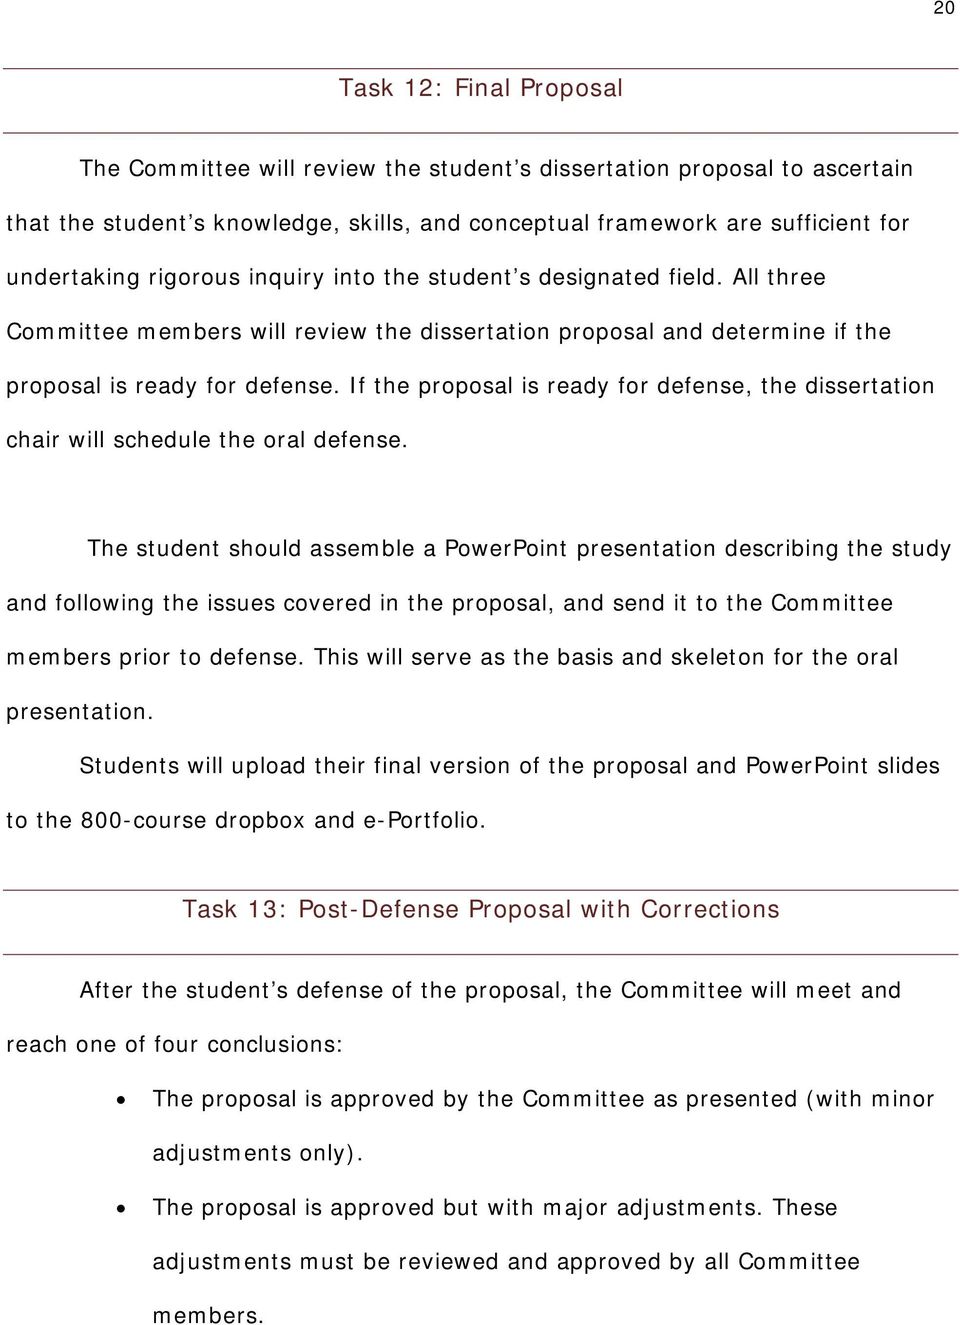 If the proposal is ready for defense, the dissertation chair will schedule the oral defense.